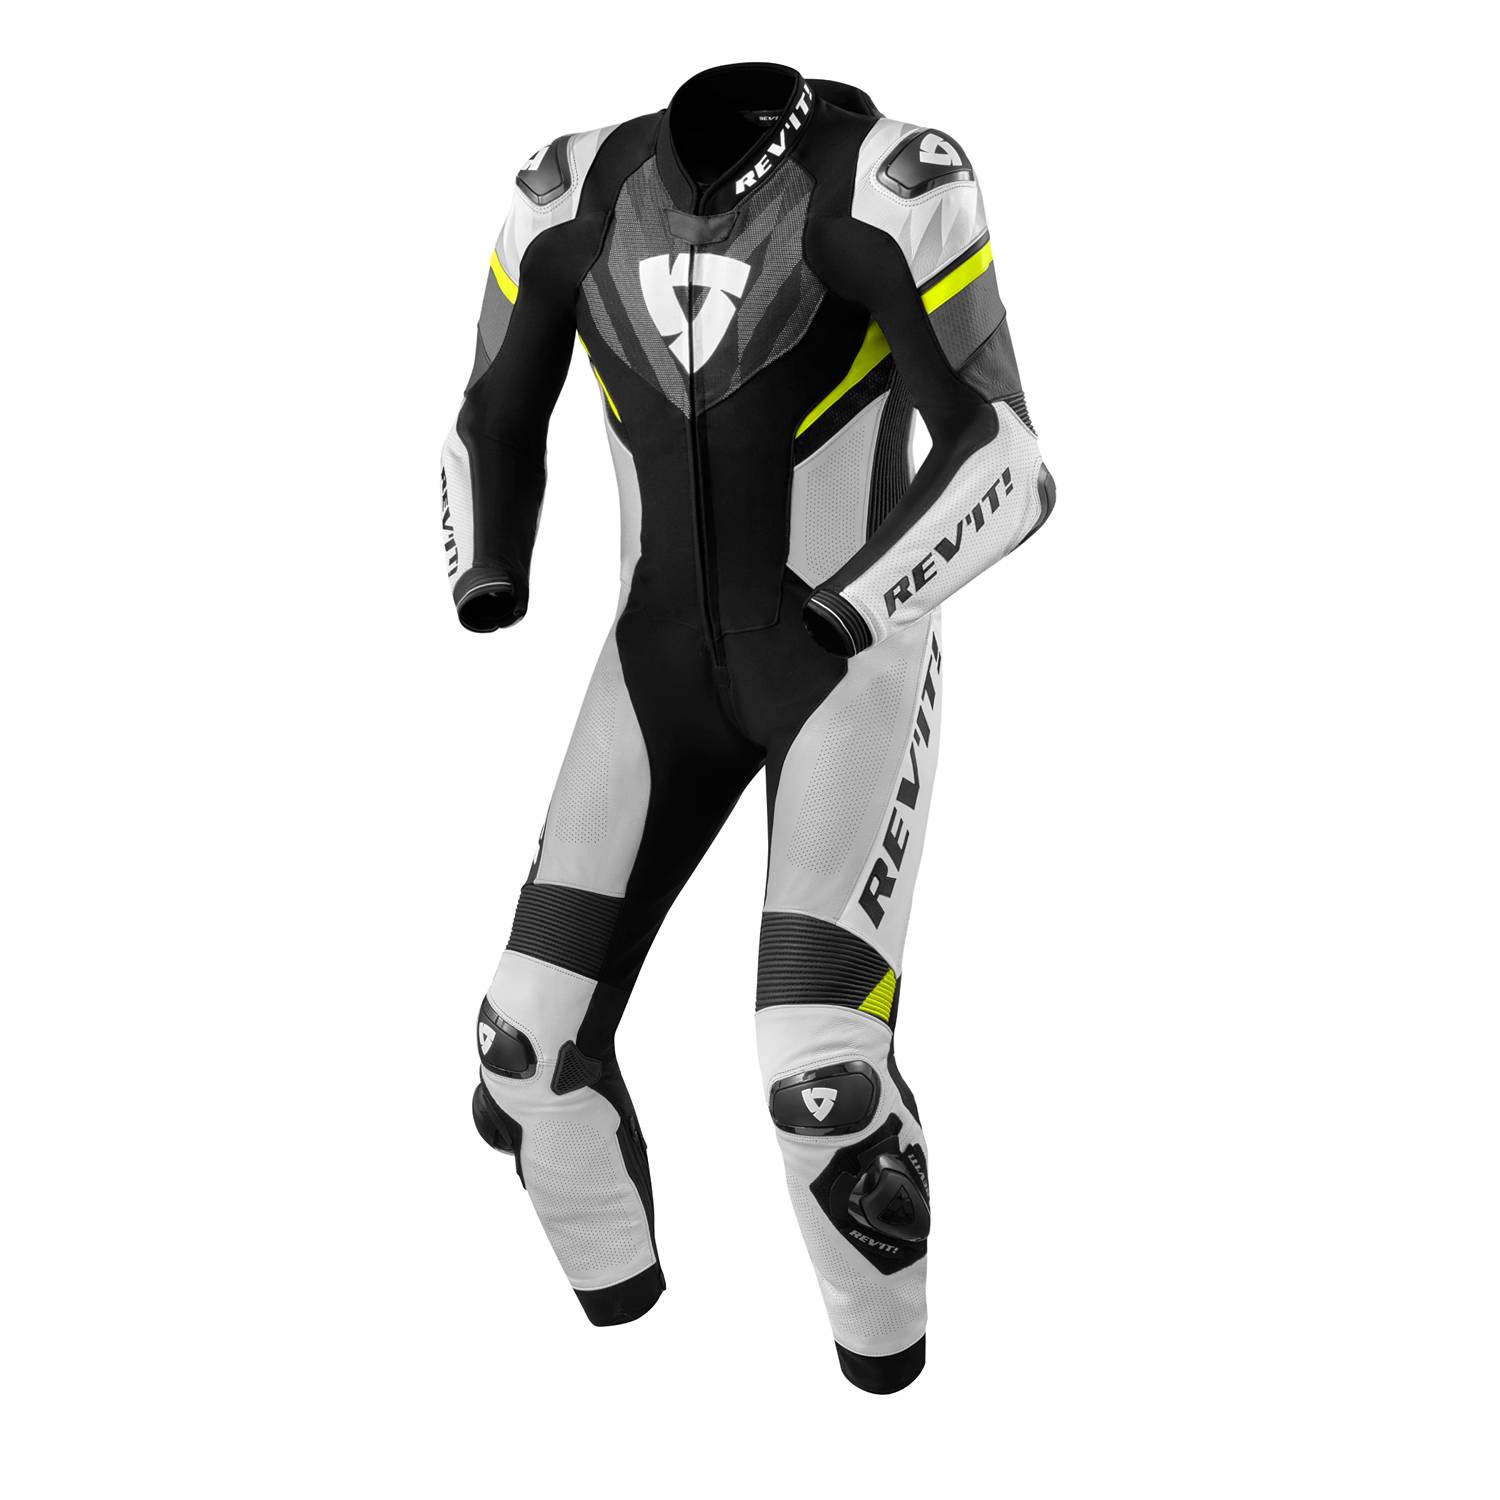 Image of REV'IT! Hyperspeed 2 One Piece Suit Black Grey Size 50 ID 8700001359672